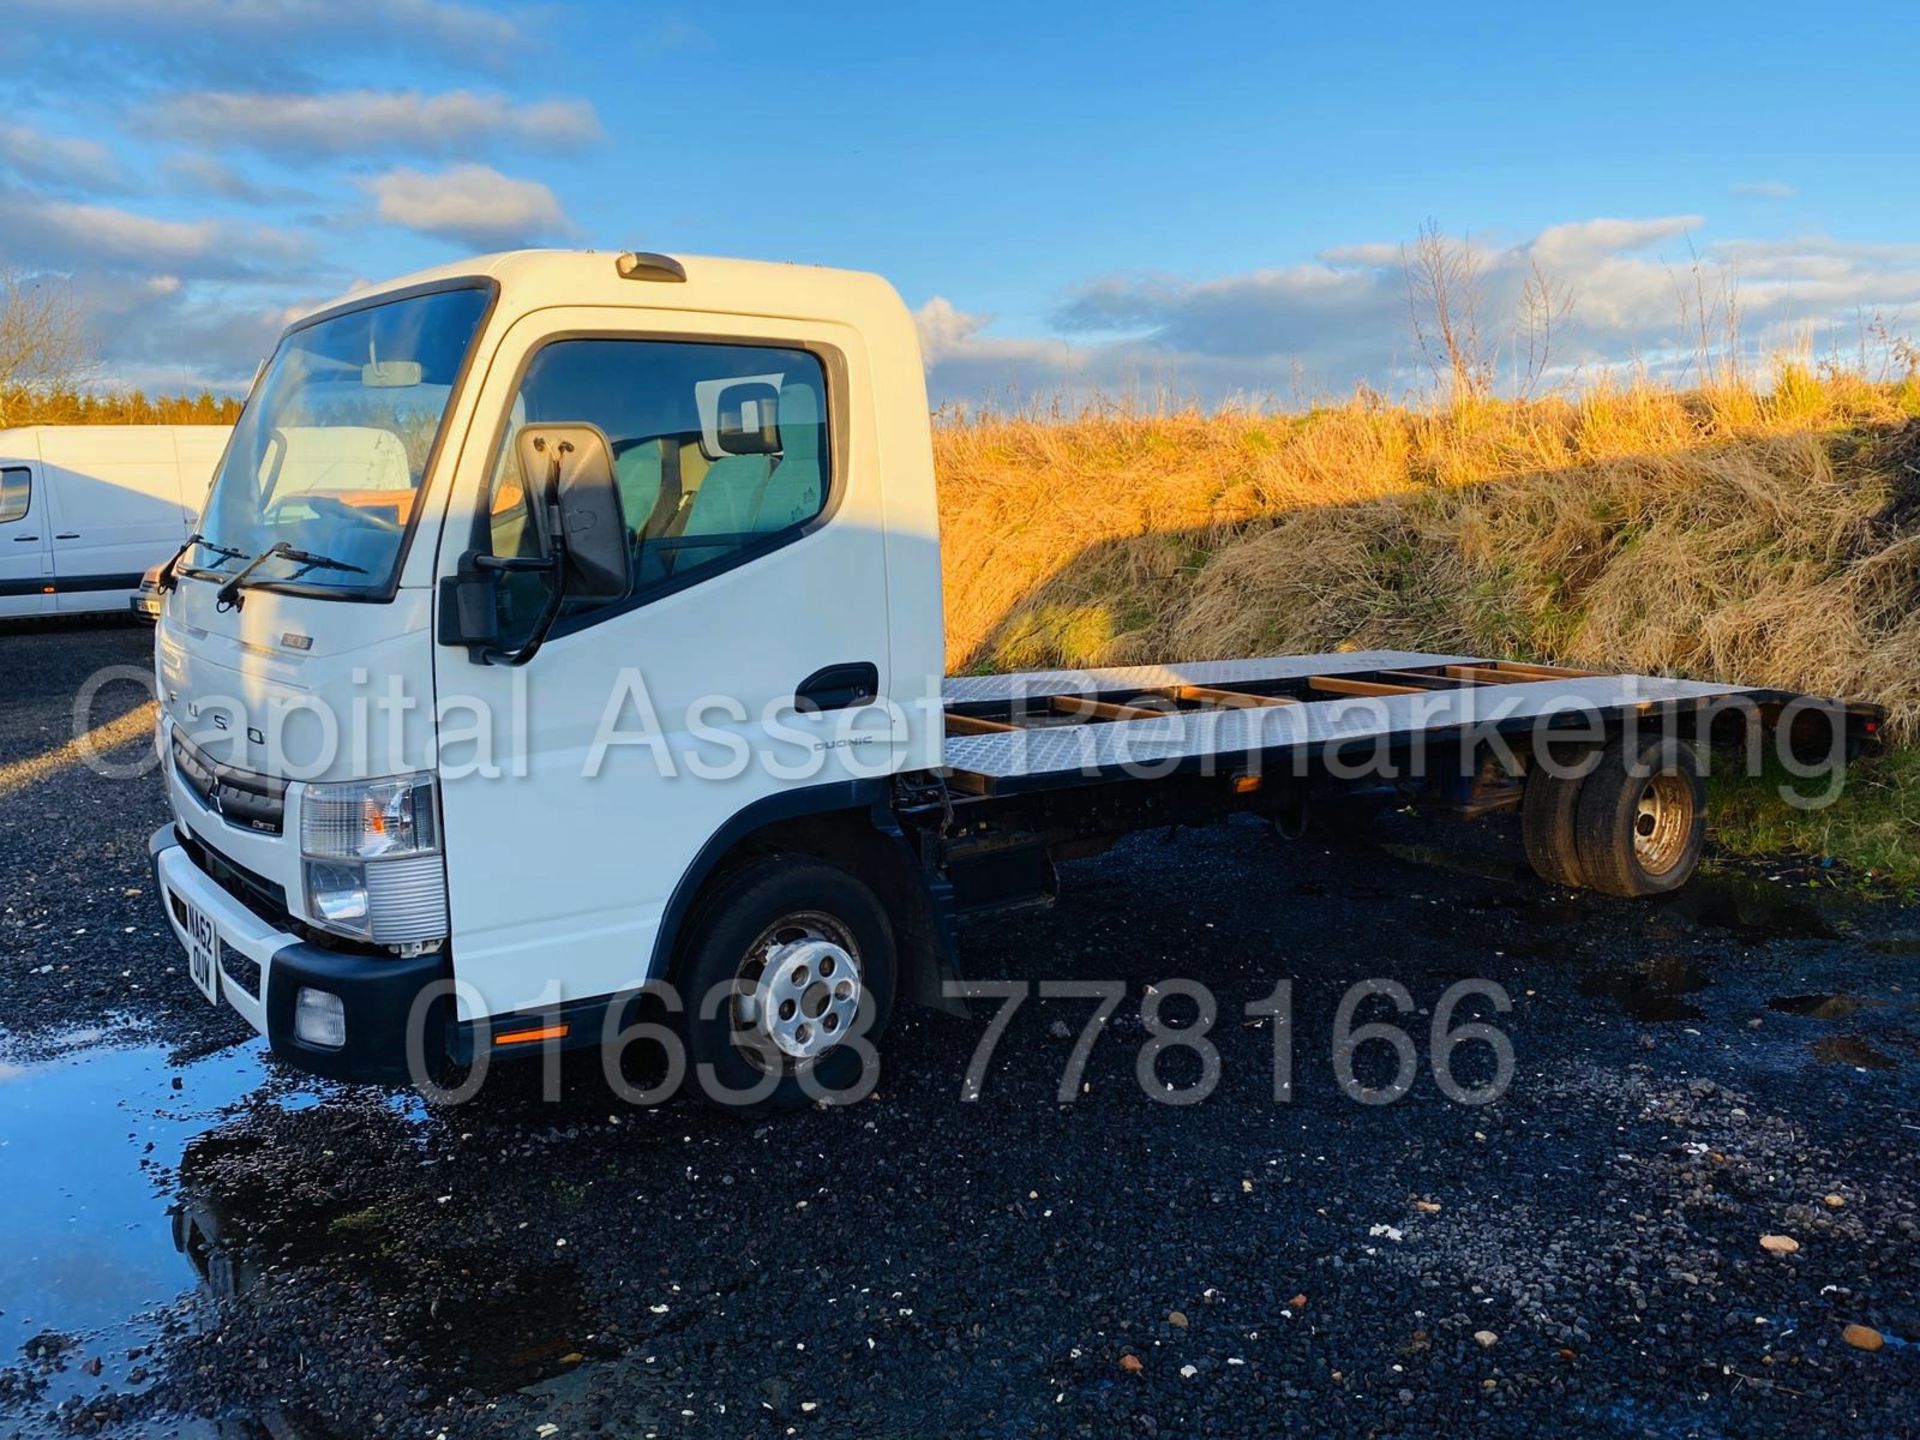 (ON SALE) MITSUBISHI FUSO CANTER 3C13 38 *LWB - RECOVERY TRUCK* (2013) '3.0 DIESEL - 130 BHP - AUTO - Image 5 of 23